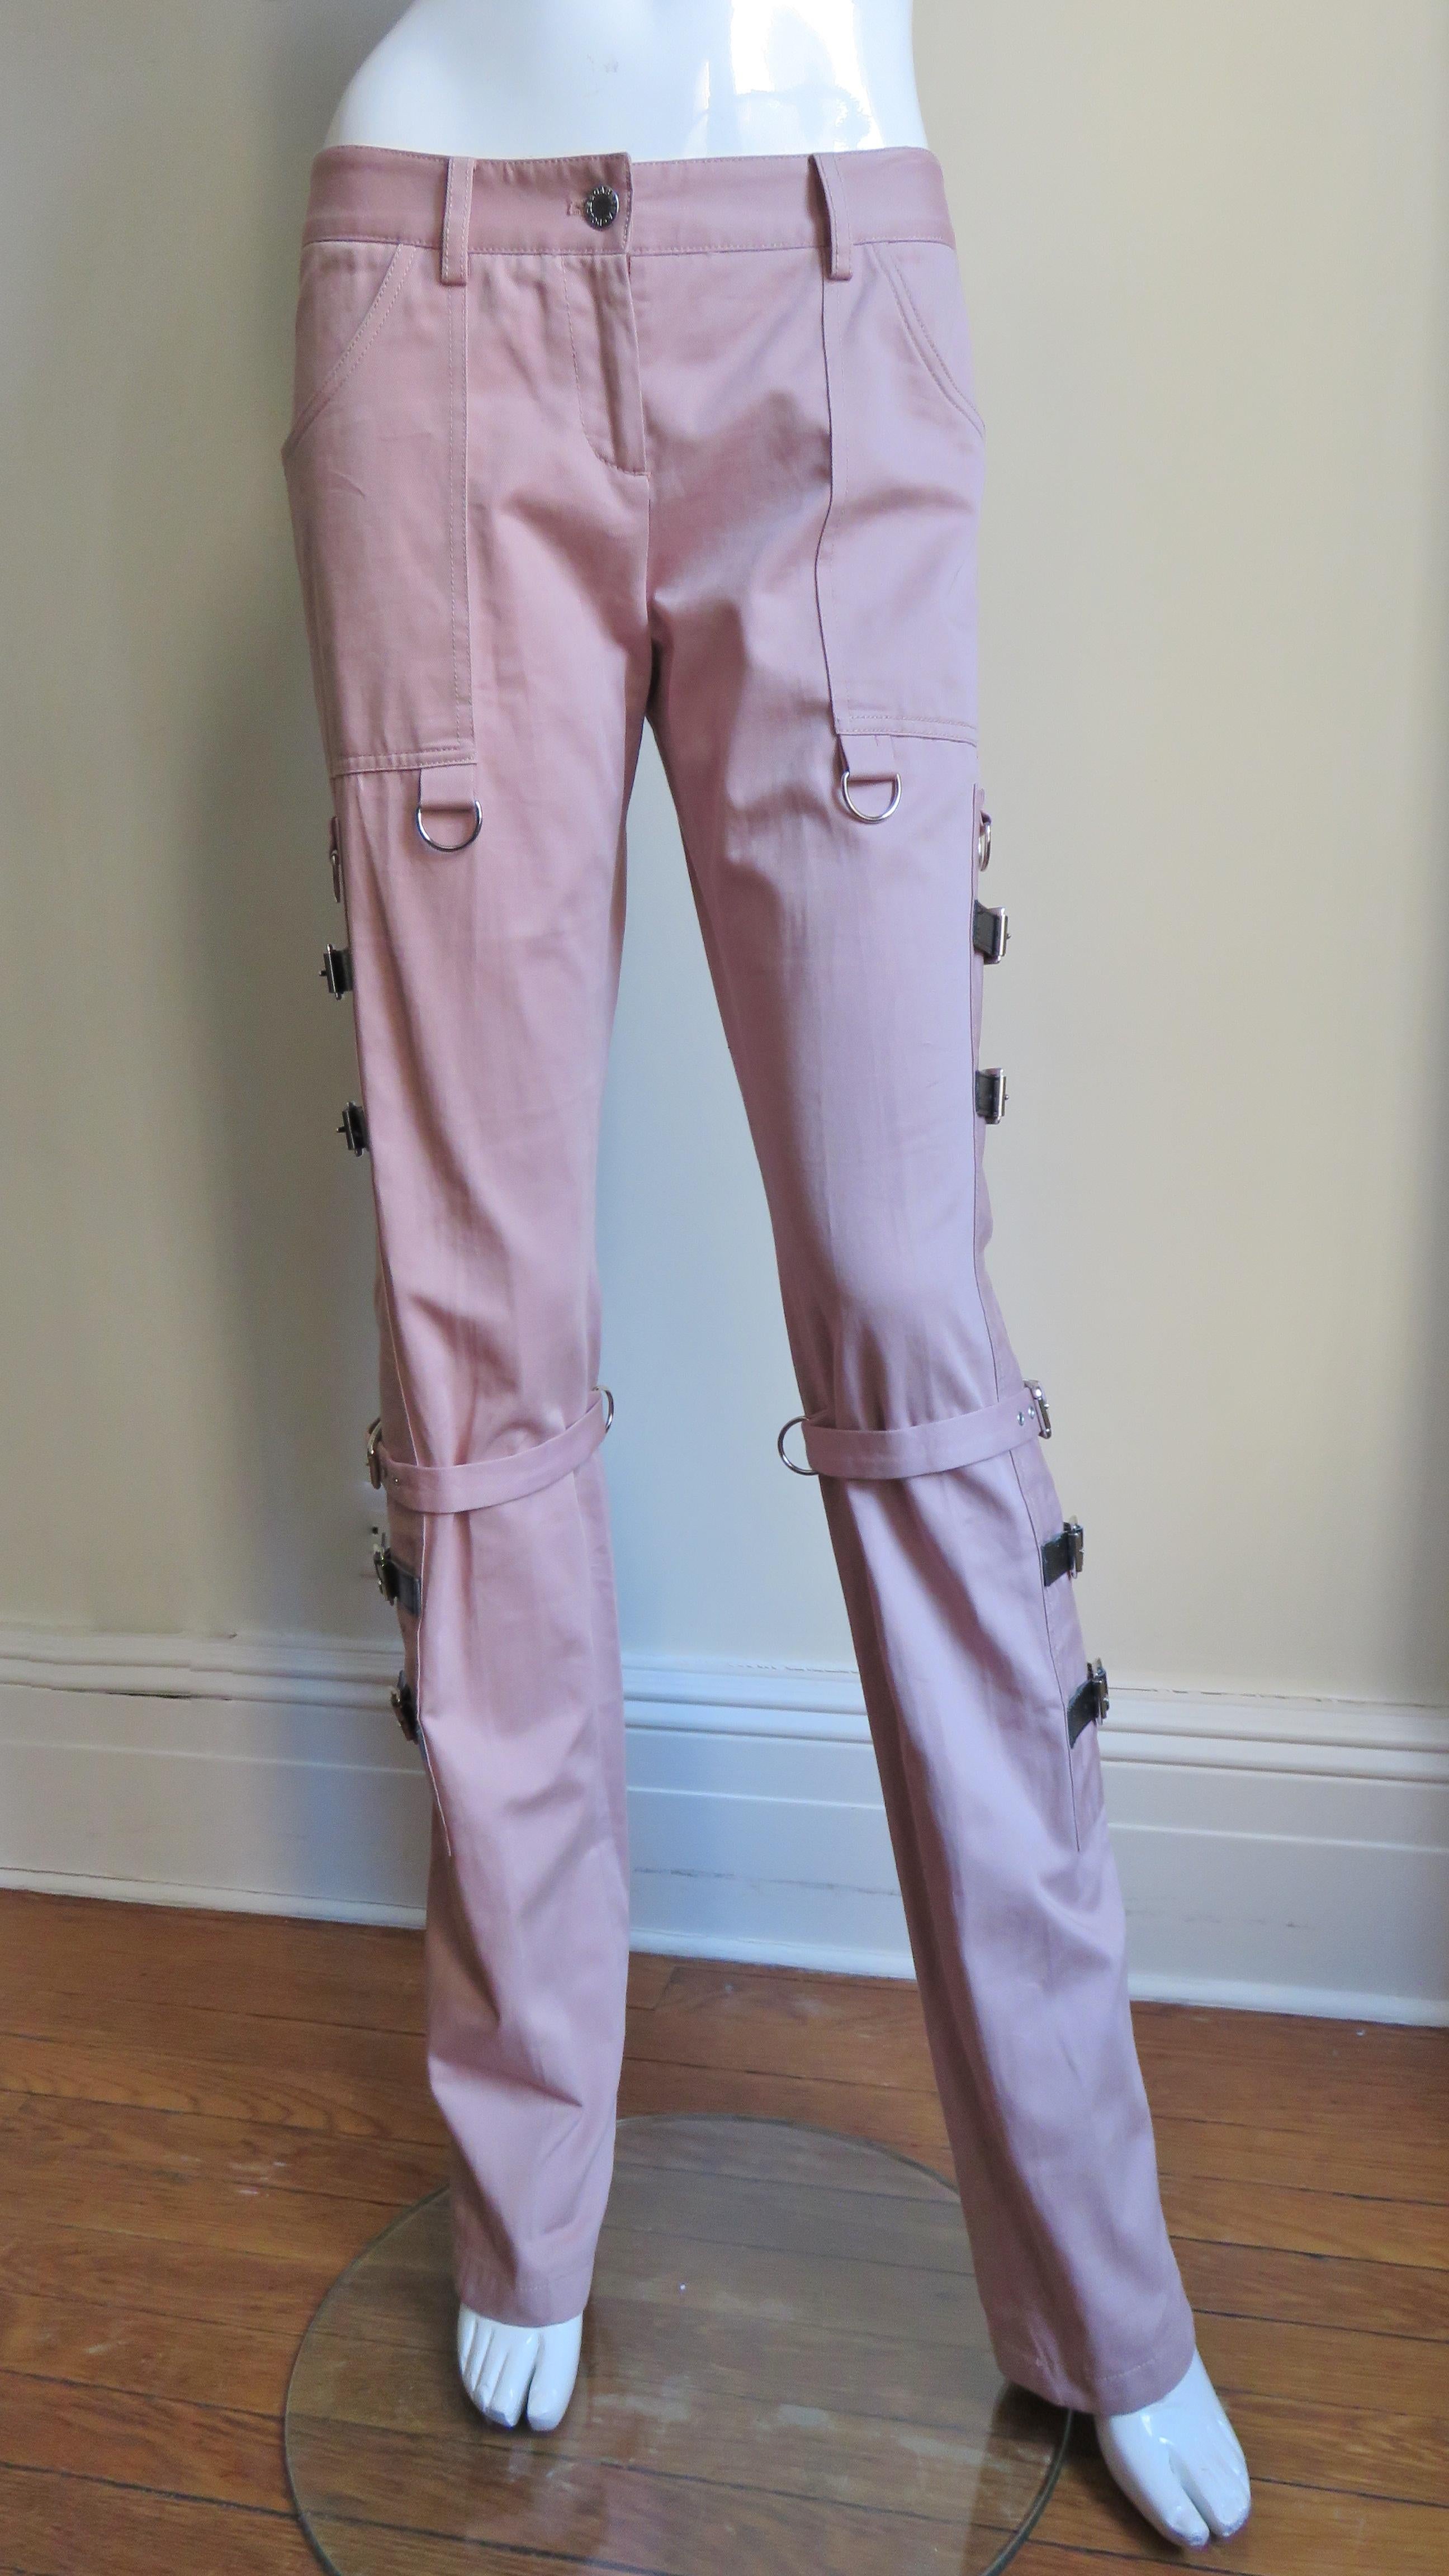 Beautiful pink cotton pants from Dolce & Gabbana.  They have a fly front button waistband with belt loops and side patch pockets.  Below the pockets are side panels almost the length of the pants with functional,adjustable leather straps and